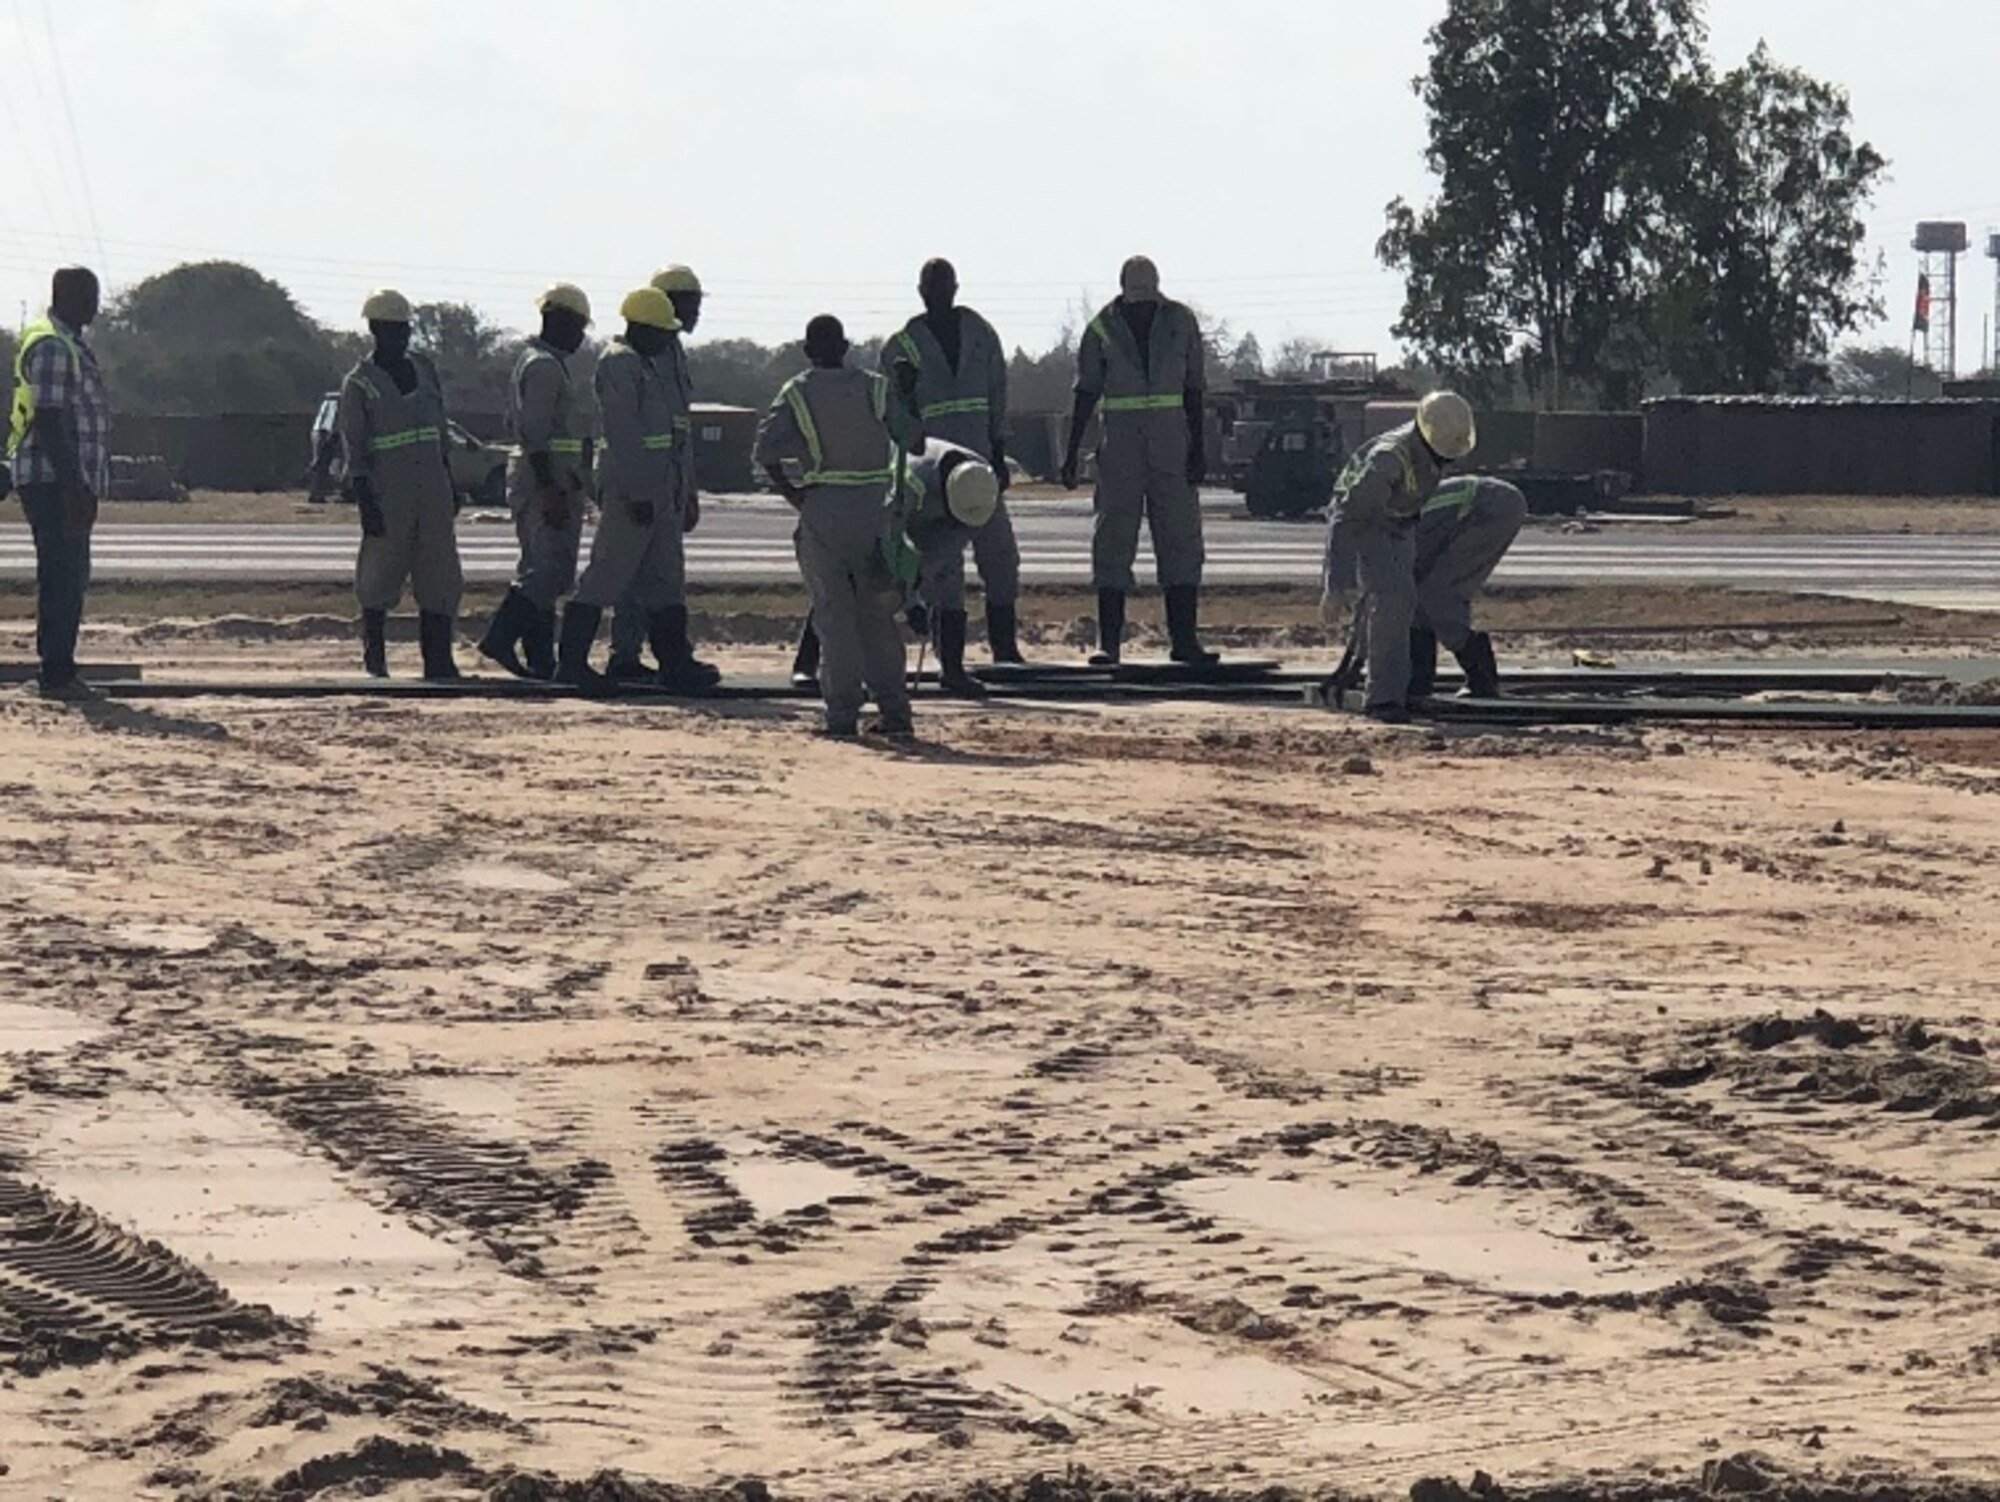 Contractors build helicopter pads to support a base build-out tasker in support of Operation Octave Quartz at a base in East Africa, Dec. 23, 2020. Airmen of the 435th Air Ground Operations Wing and 435th Air Expeditionary Wing took part in the movement of personnel and cargo to support OOQ. (Courtesy photo)